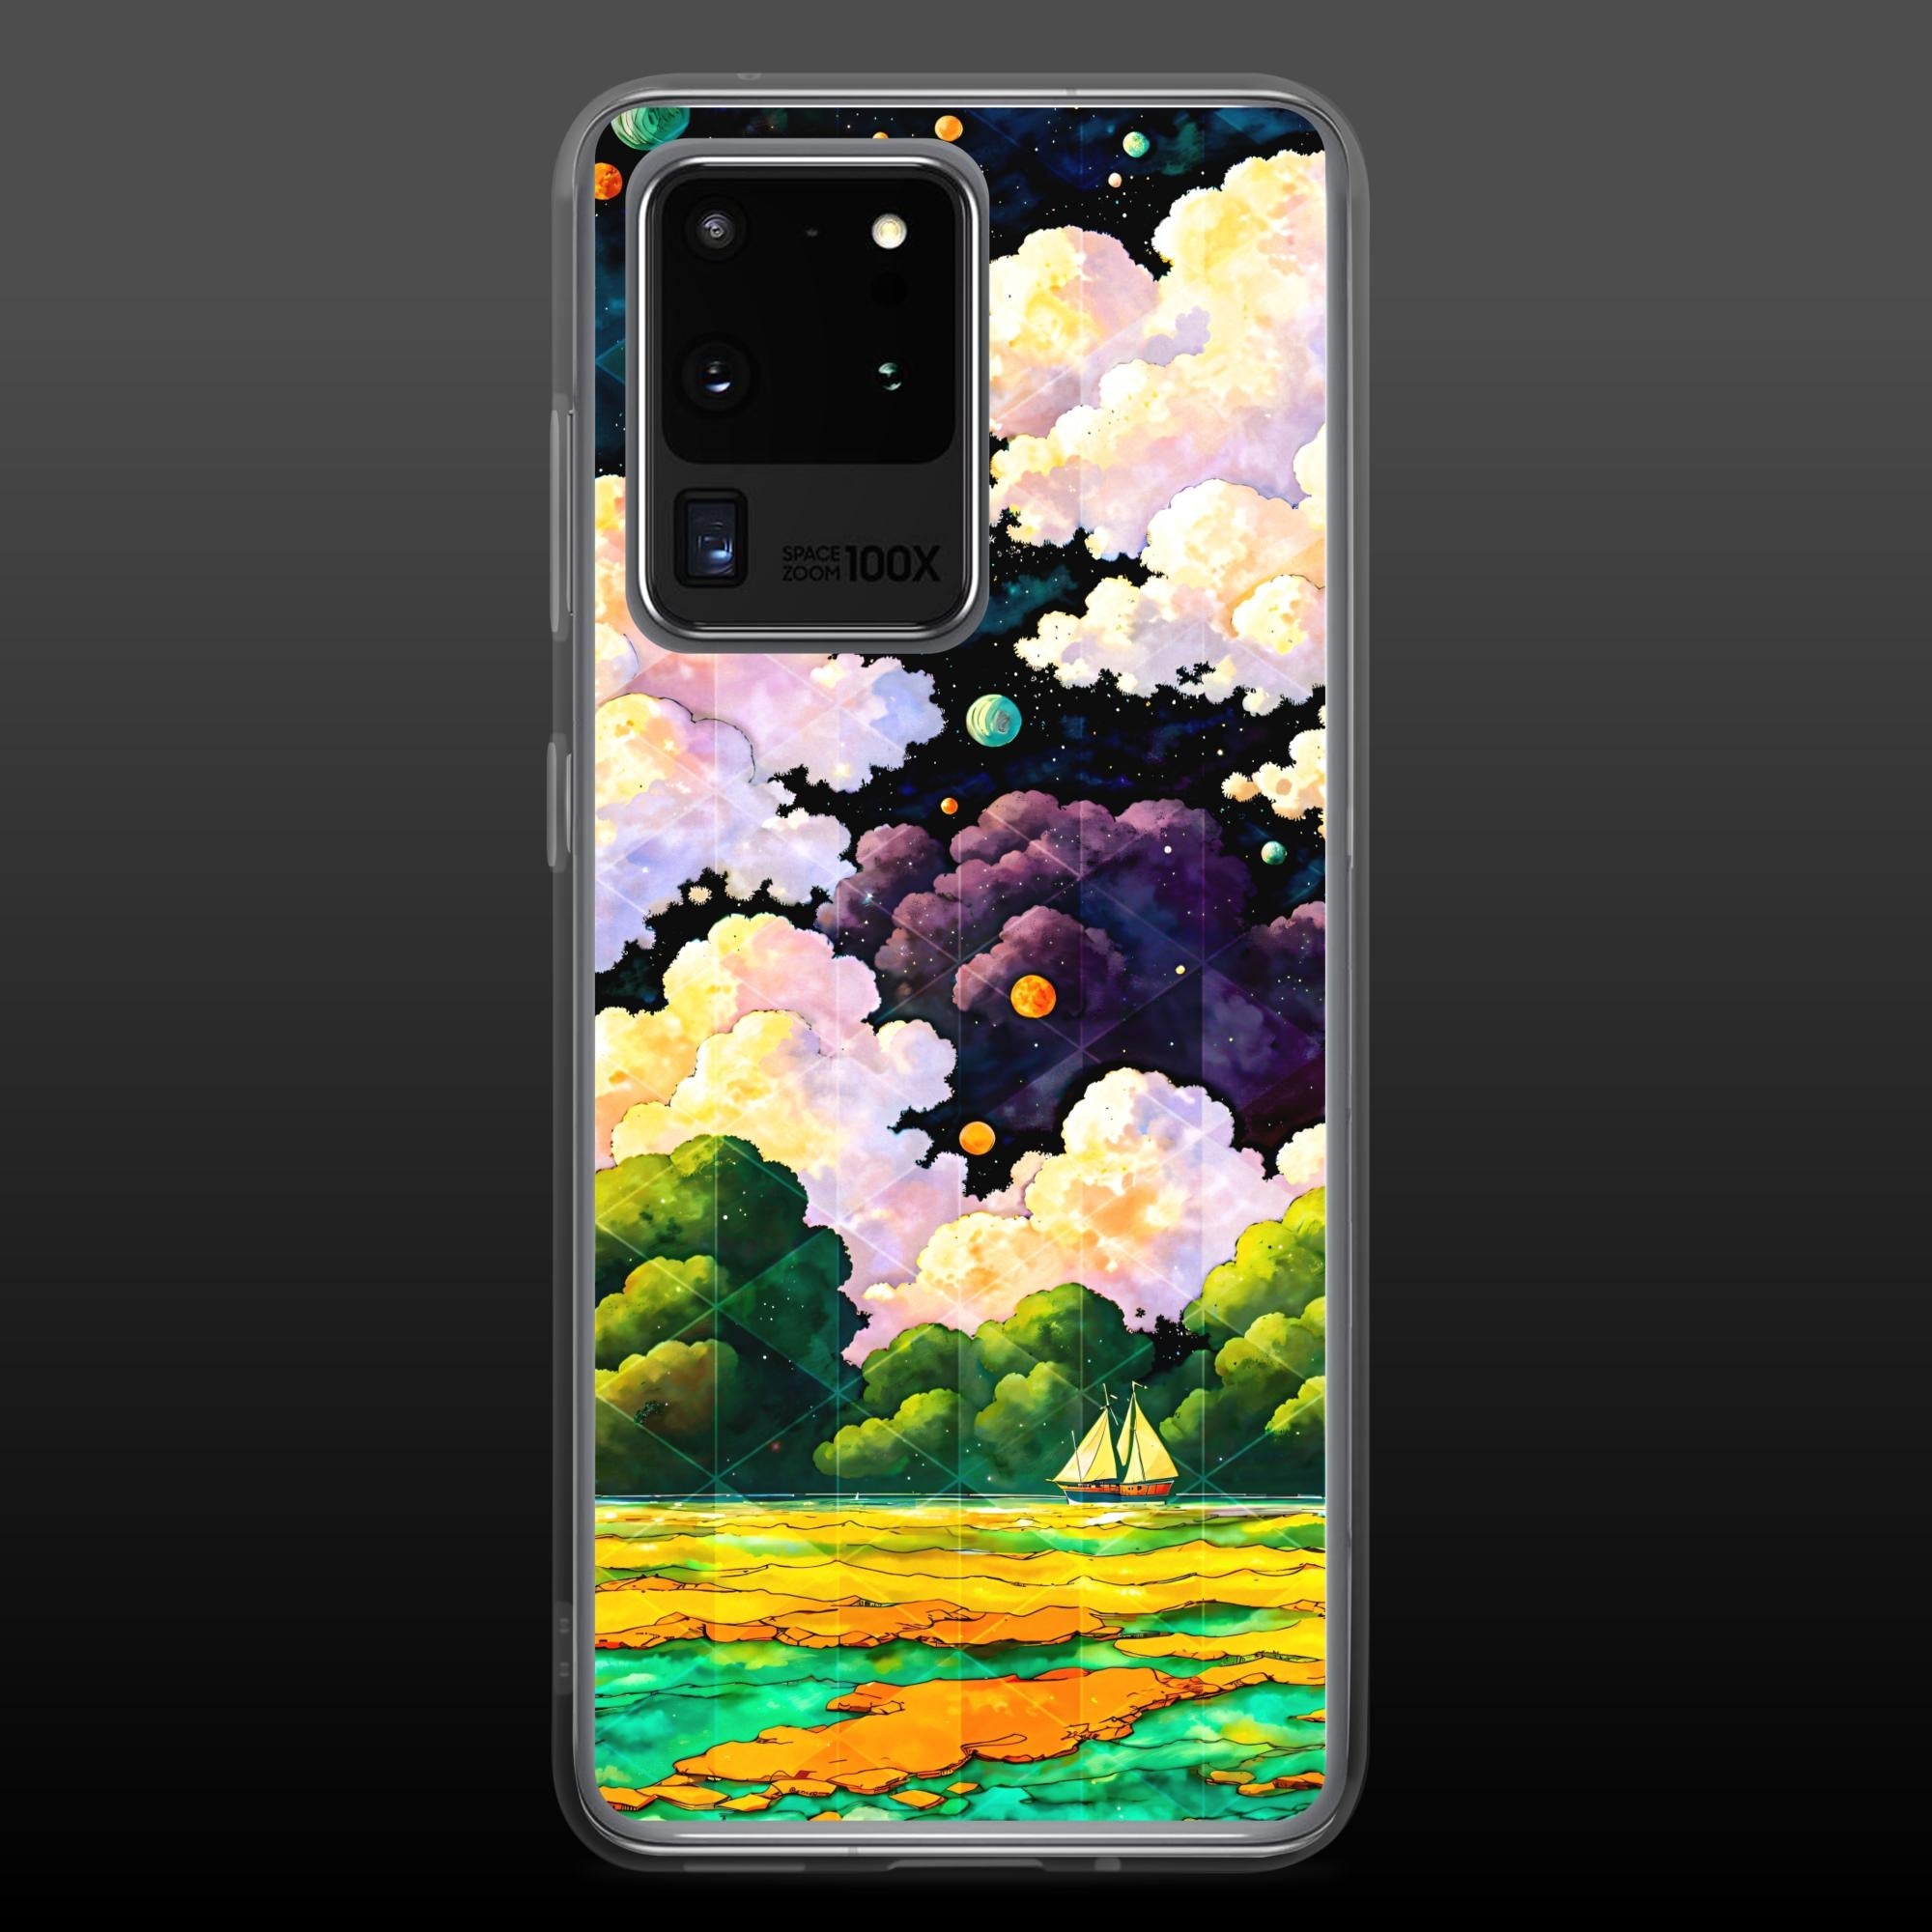 "Horizon quest" clear samsung case - Clear samsung case - Ever colorful